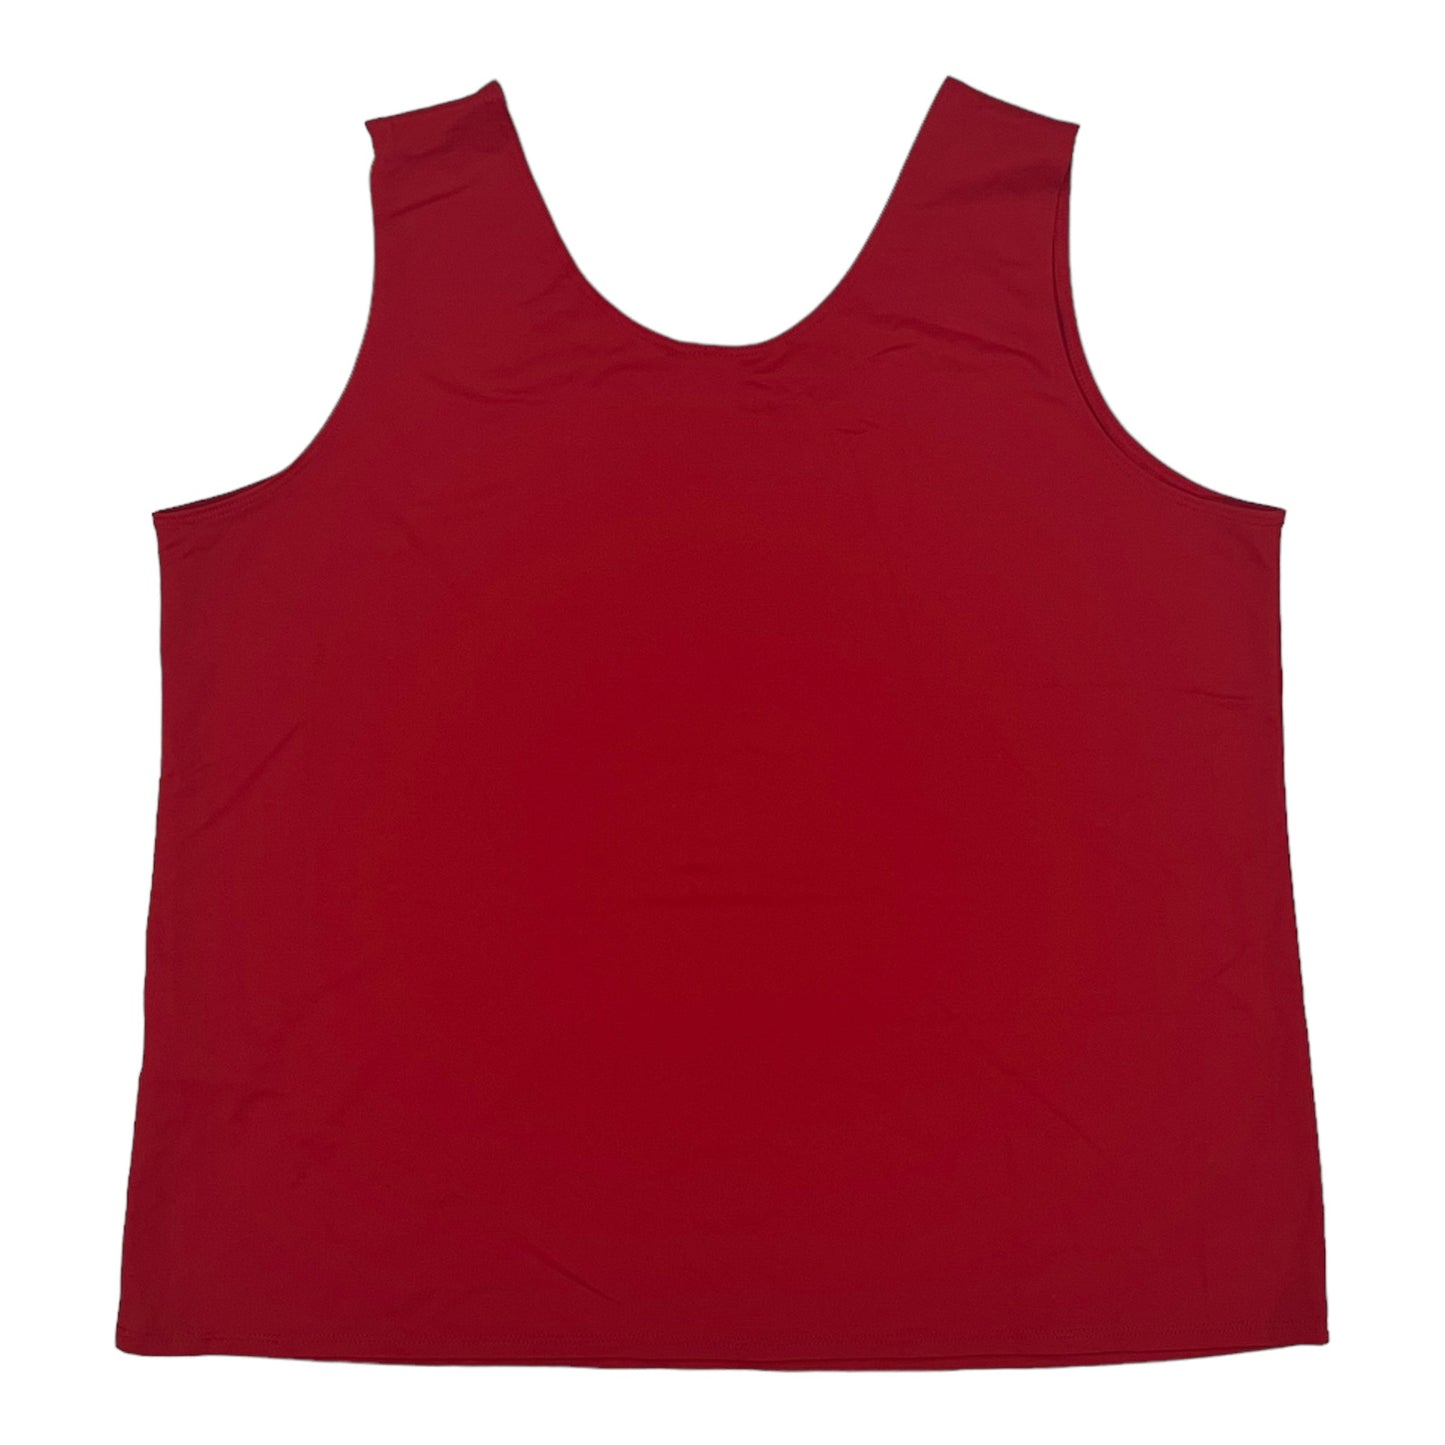 RED CHICOS TANK TOP, Size 2X